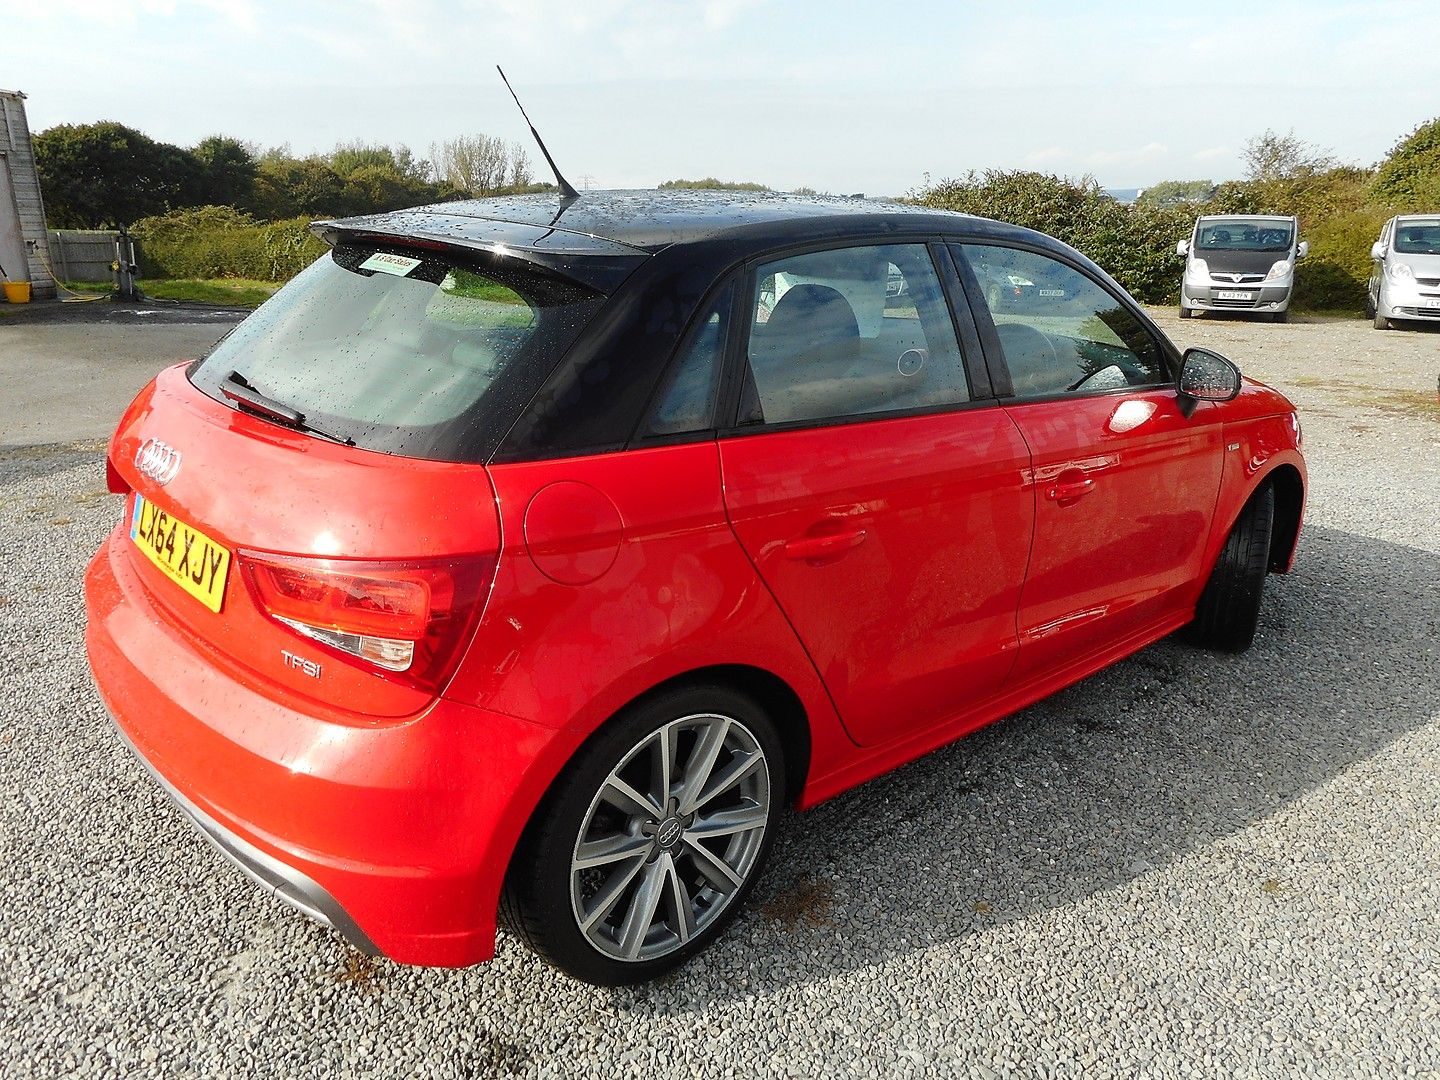 AUDI A1 Sportback 1.4 TFSI S line Style Edition 122PS (2014) - Picture 2